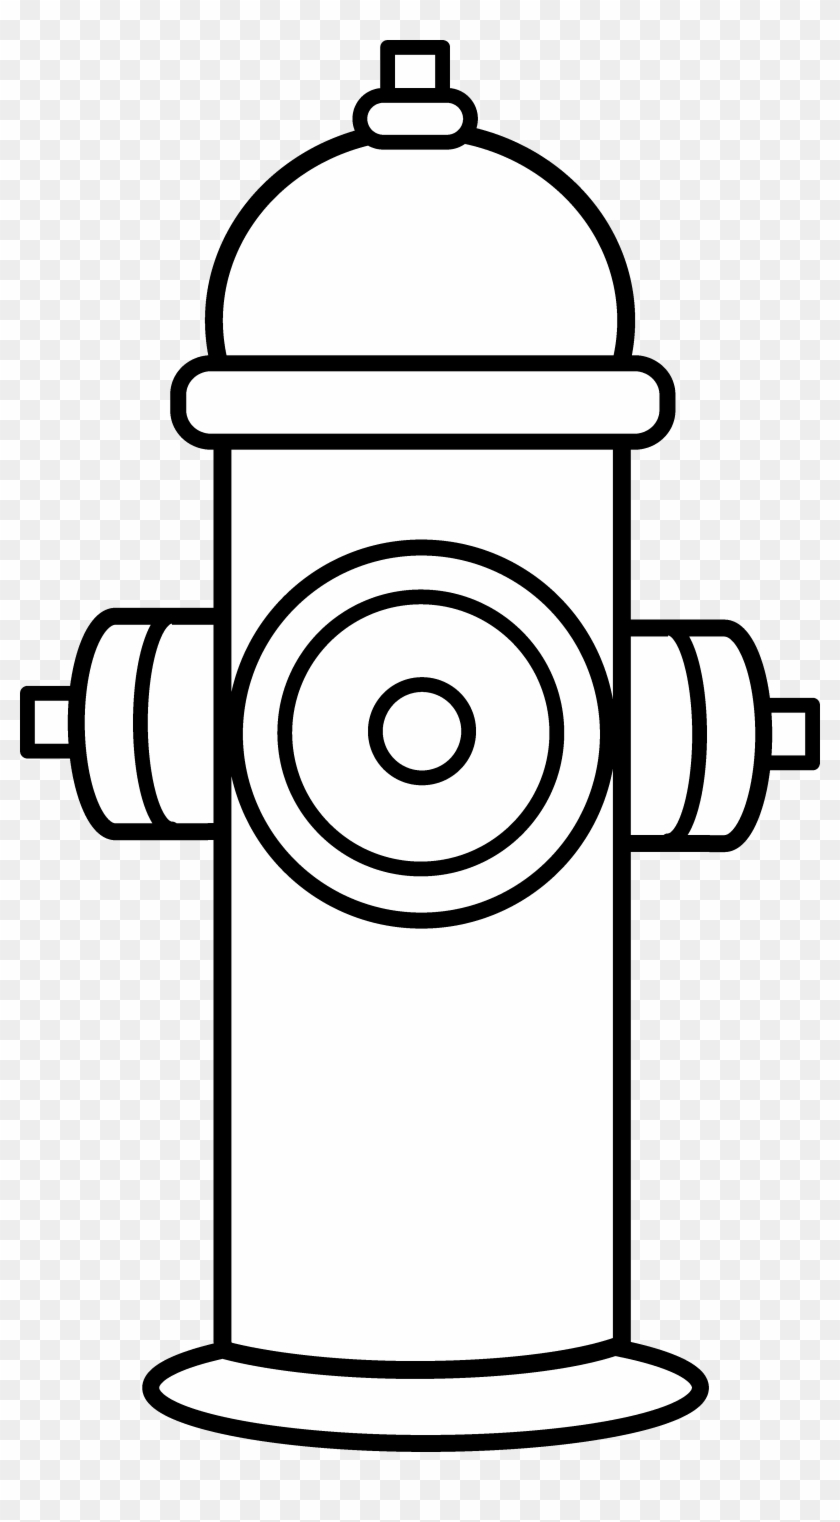 Clip Art Fire Hydrant - Png Download #35433